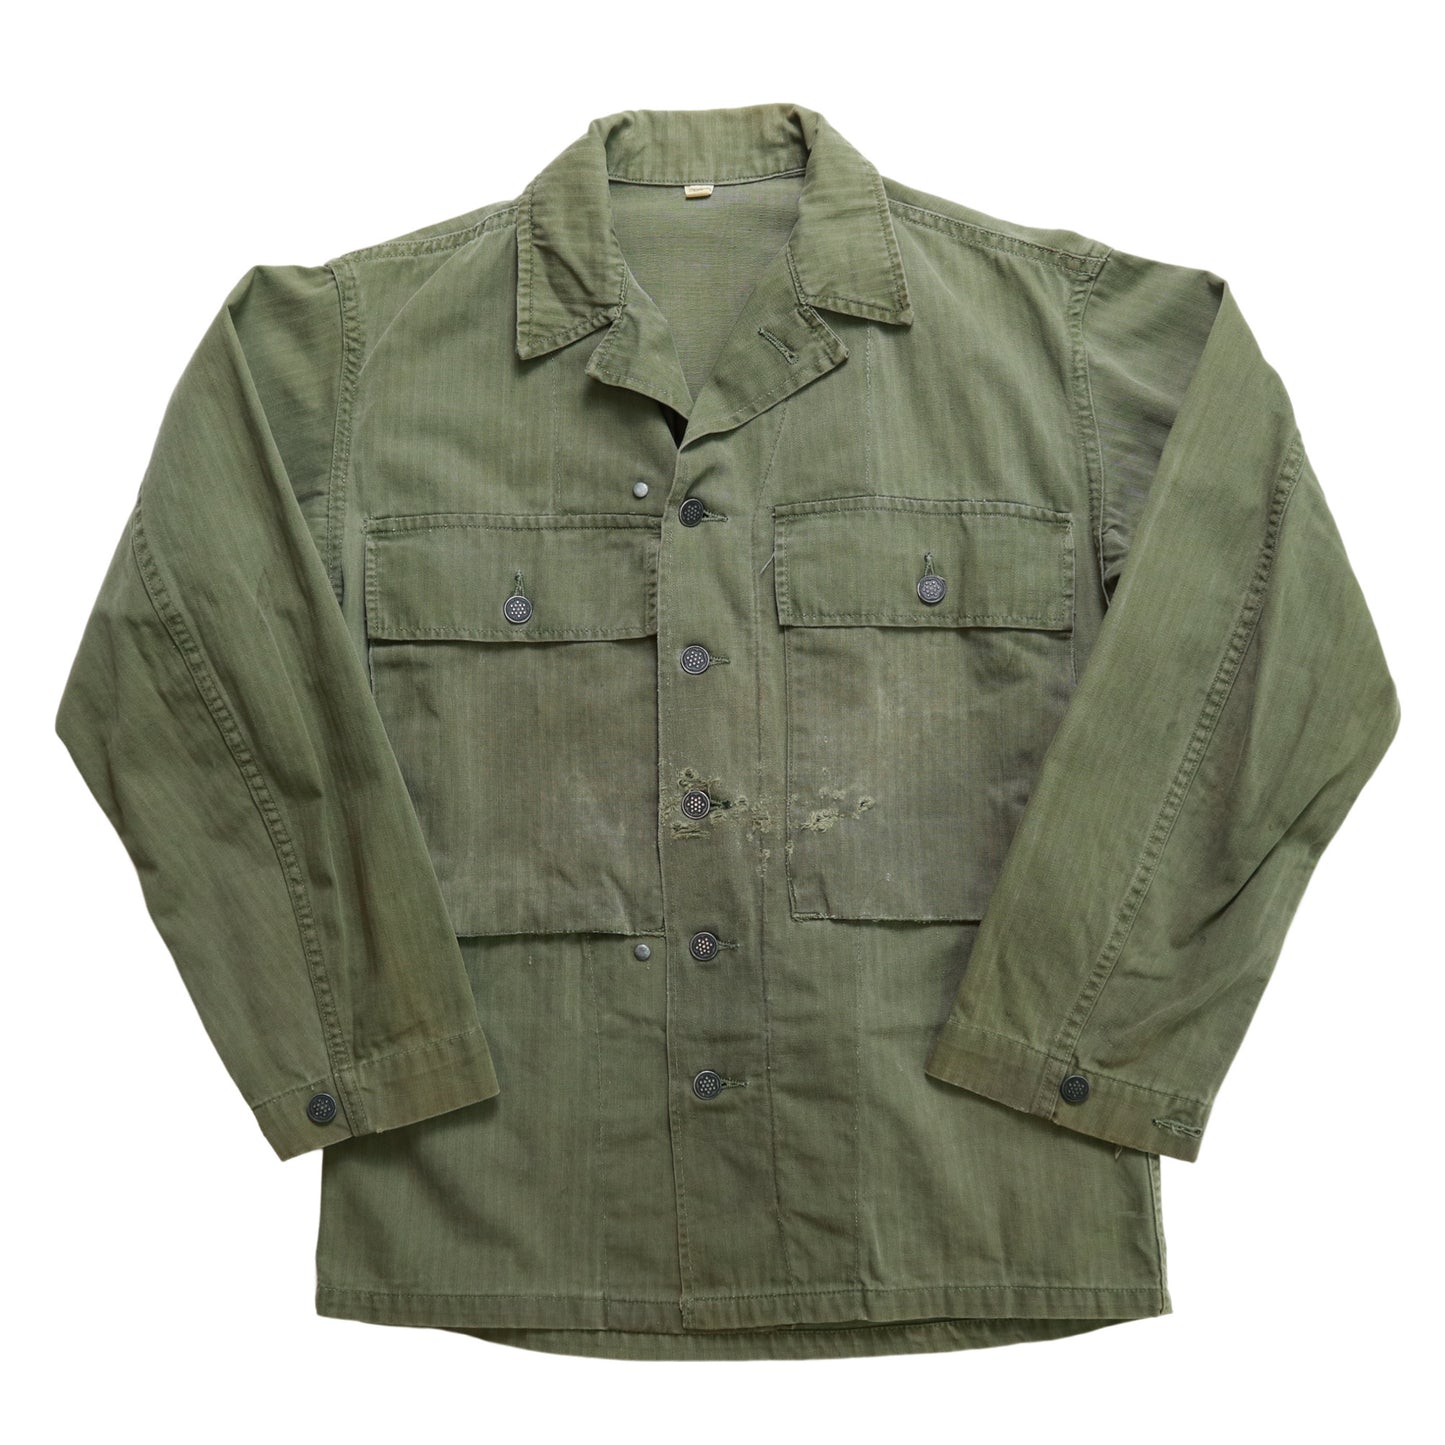 1940's U.S. military issued M43 type2 HBT JACKET